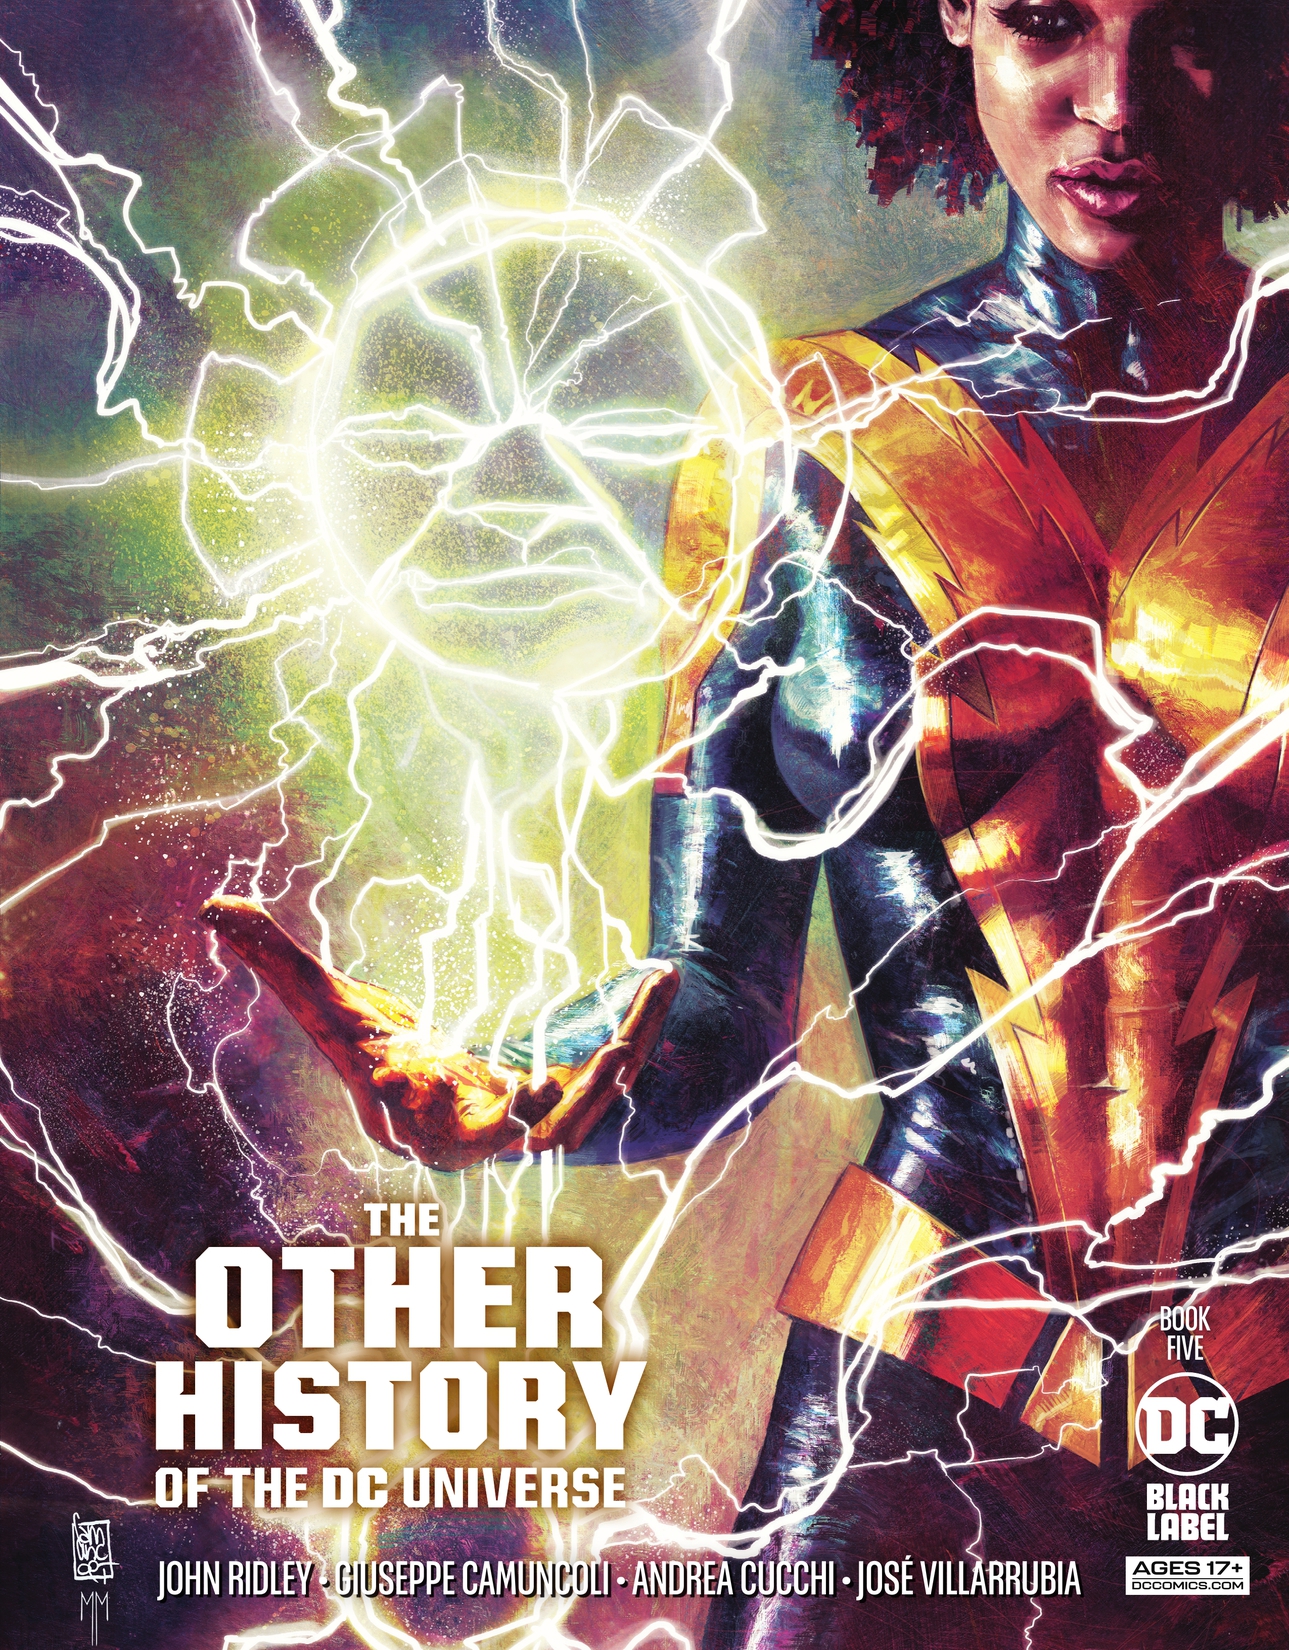 The Other History of the DC Universe #5 preview images